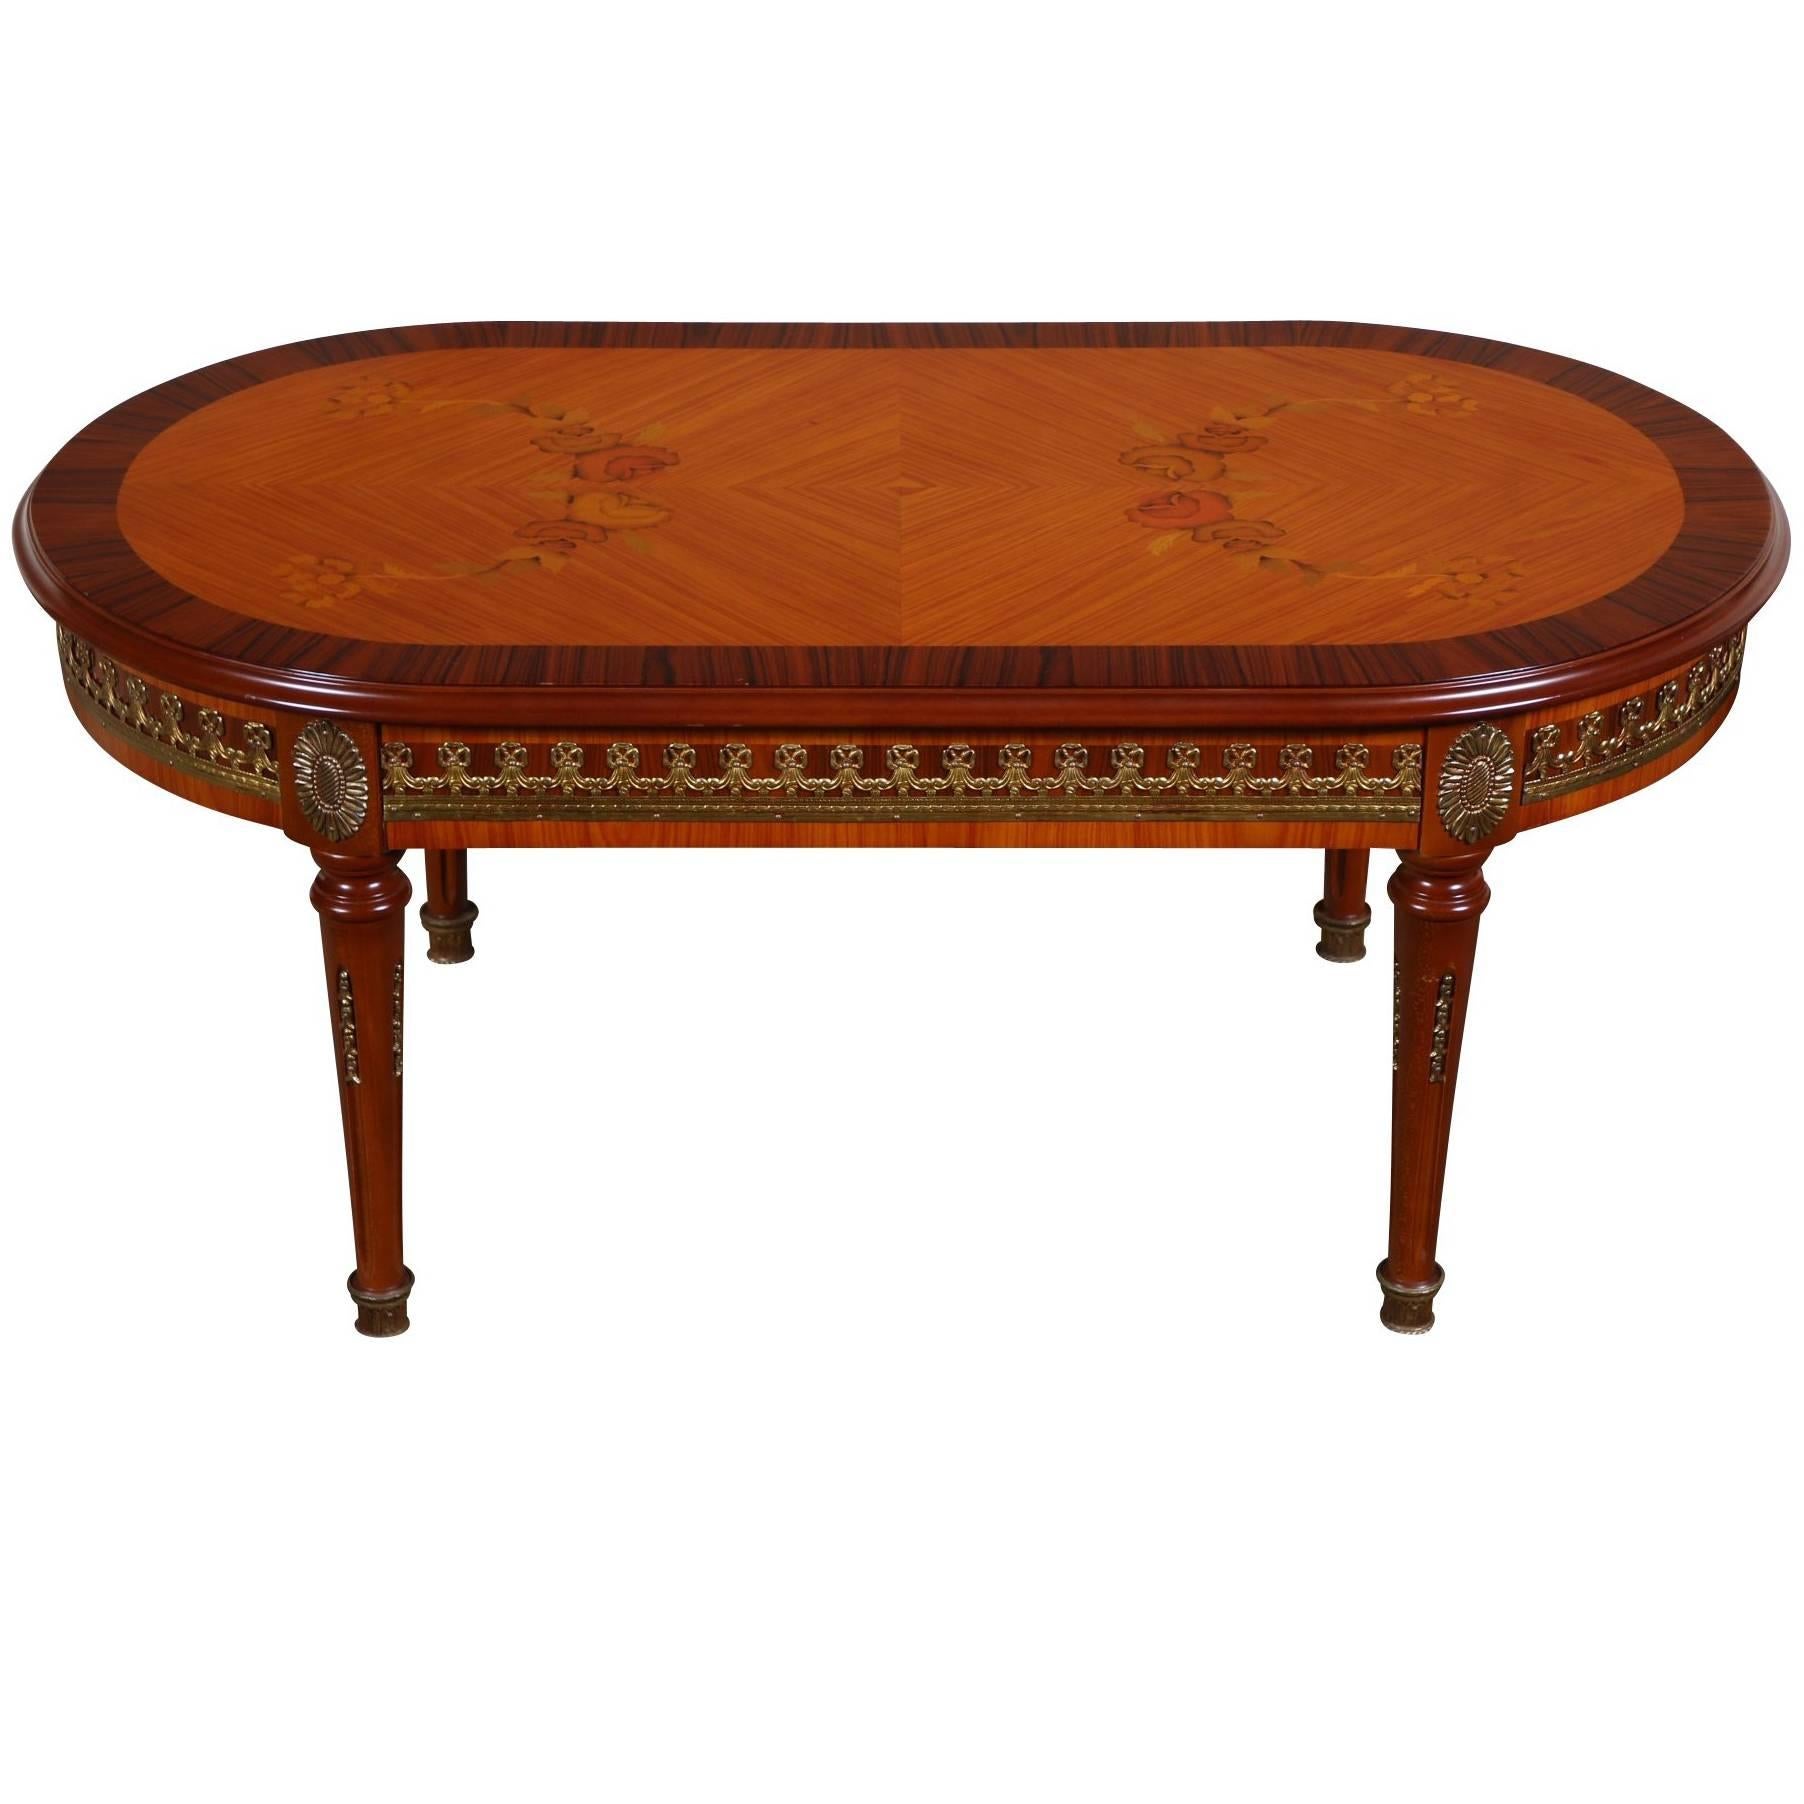 Oval Coffee Table with Marquetry and Brass Mounts